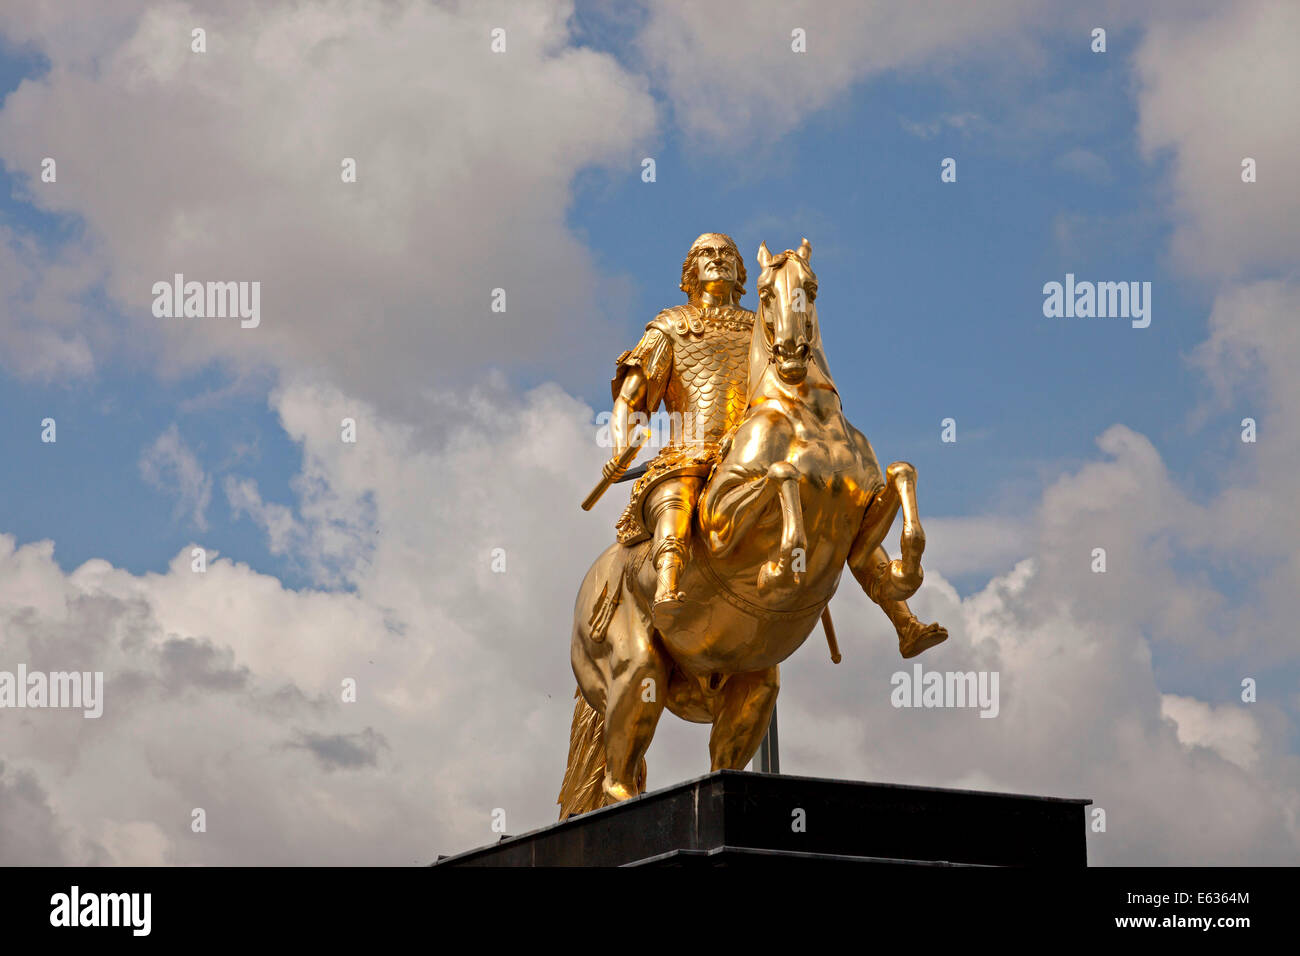 The Goldener Reiter or Golden Rider, a gilded equestrian statue of Augustus the strong,  in Dresden, Saxony, Germany, Europe Stock Photo